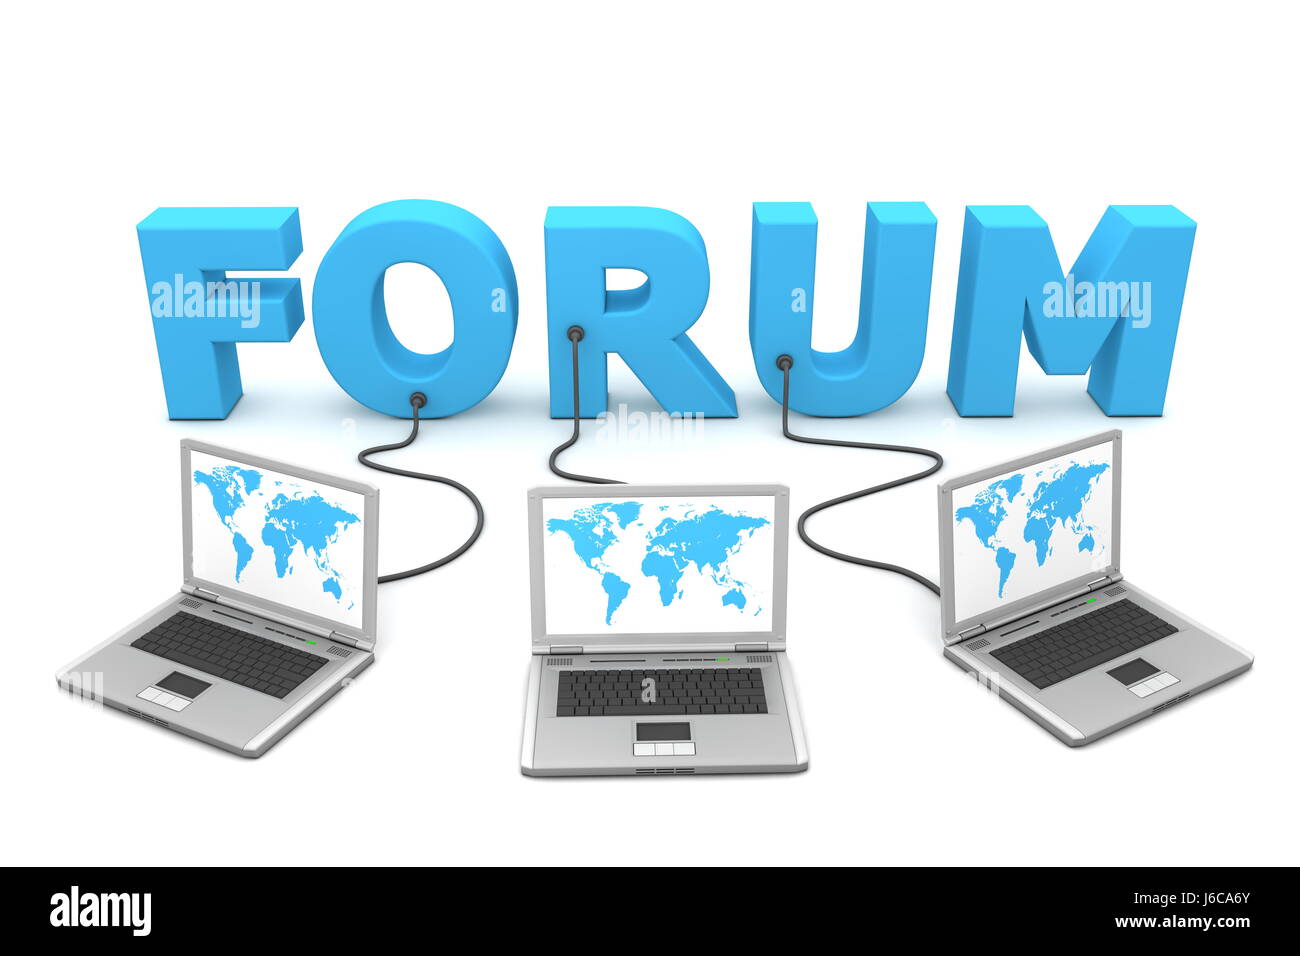 Forum only